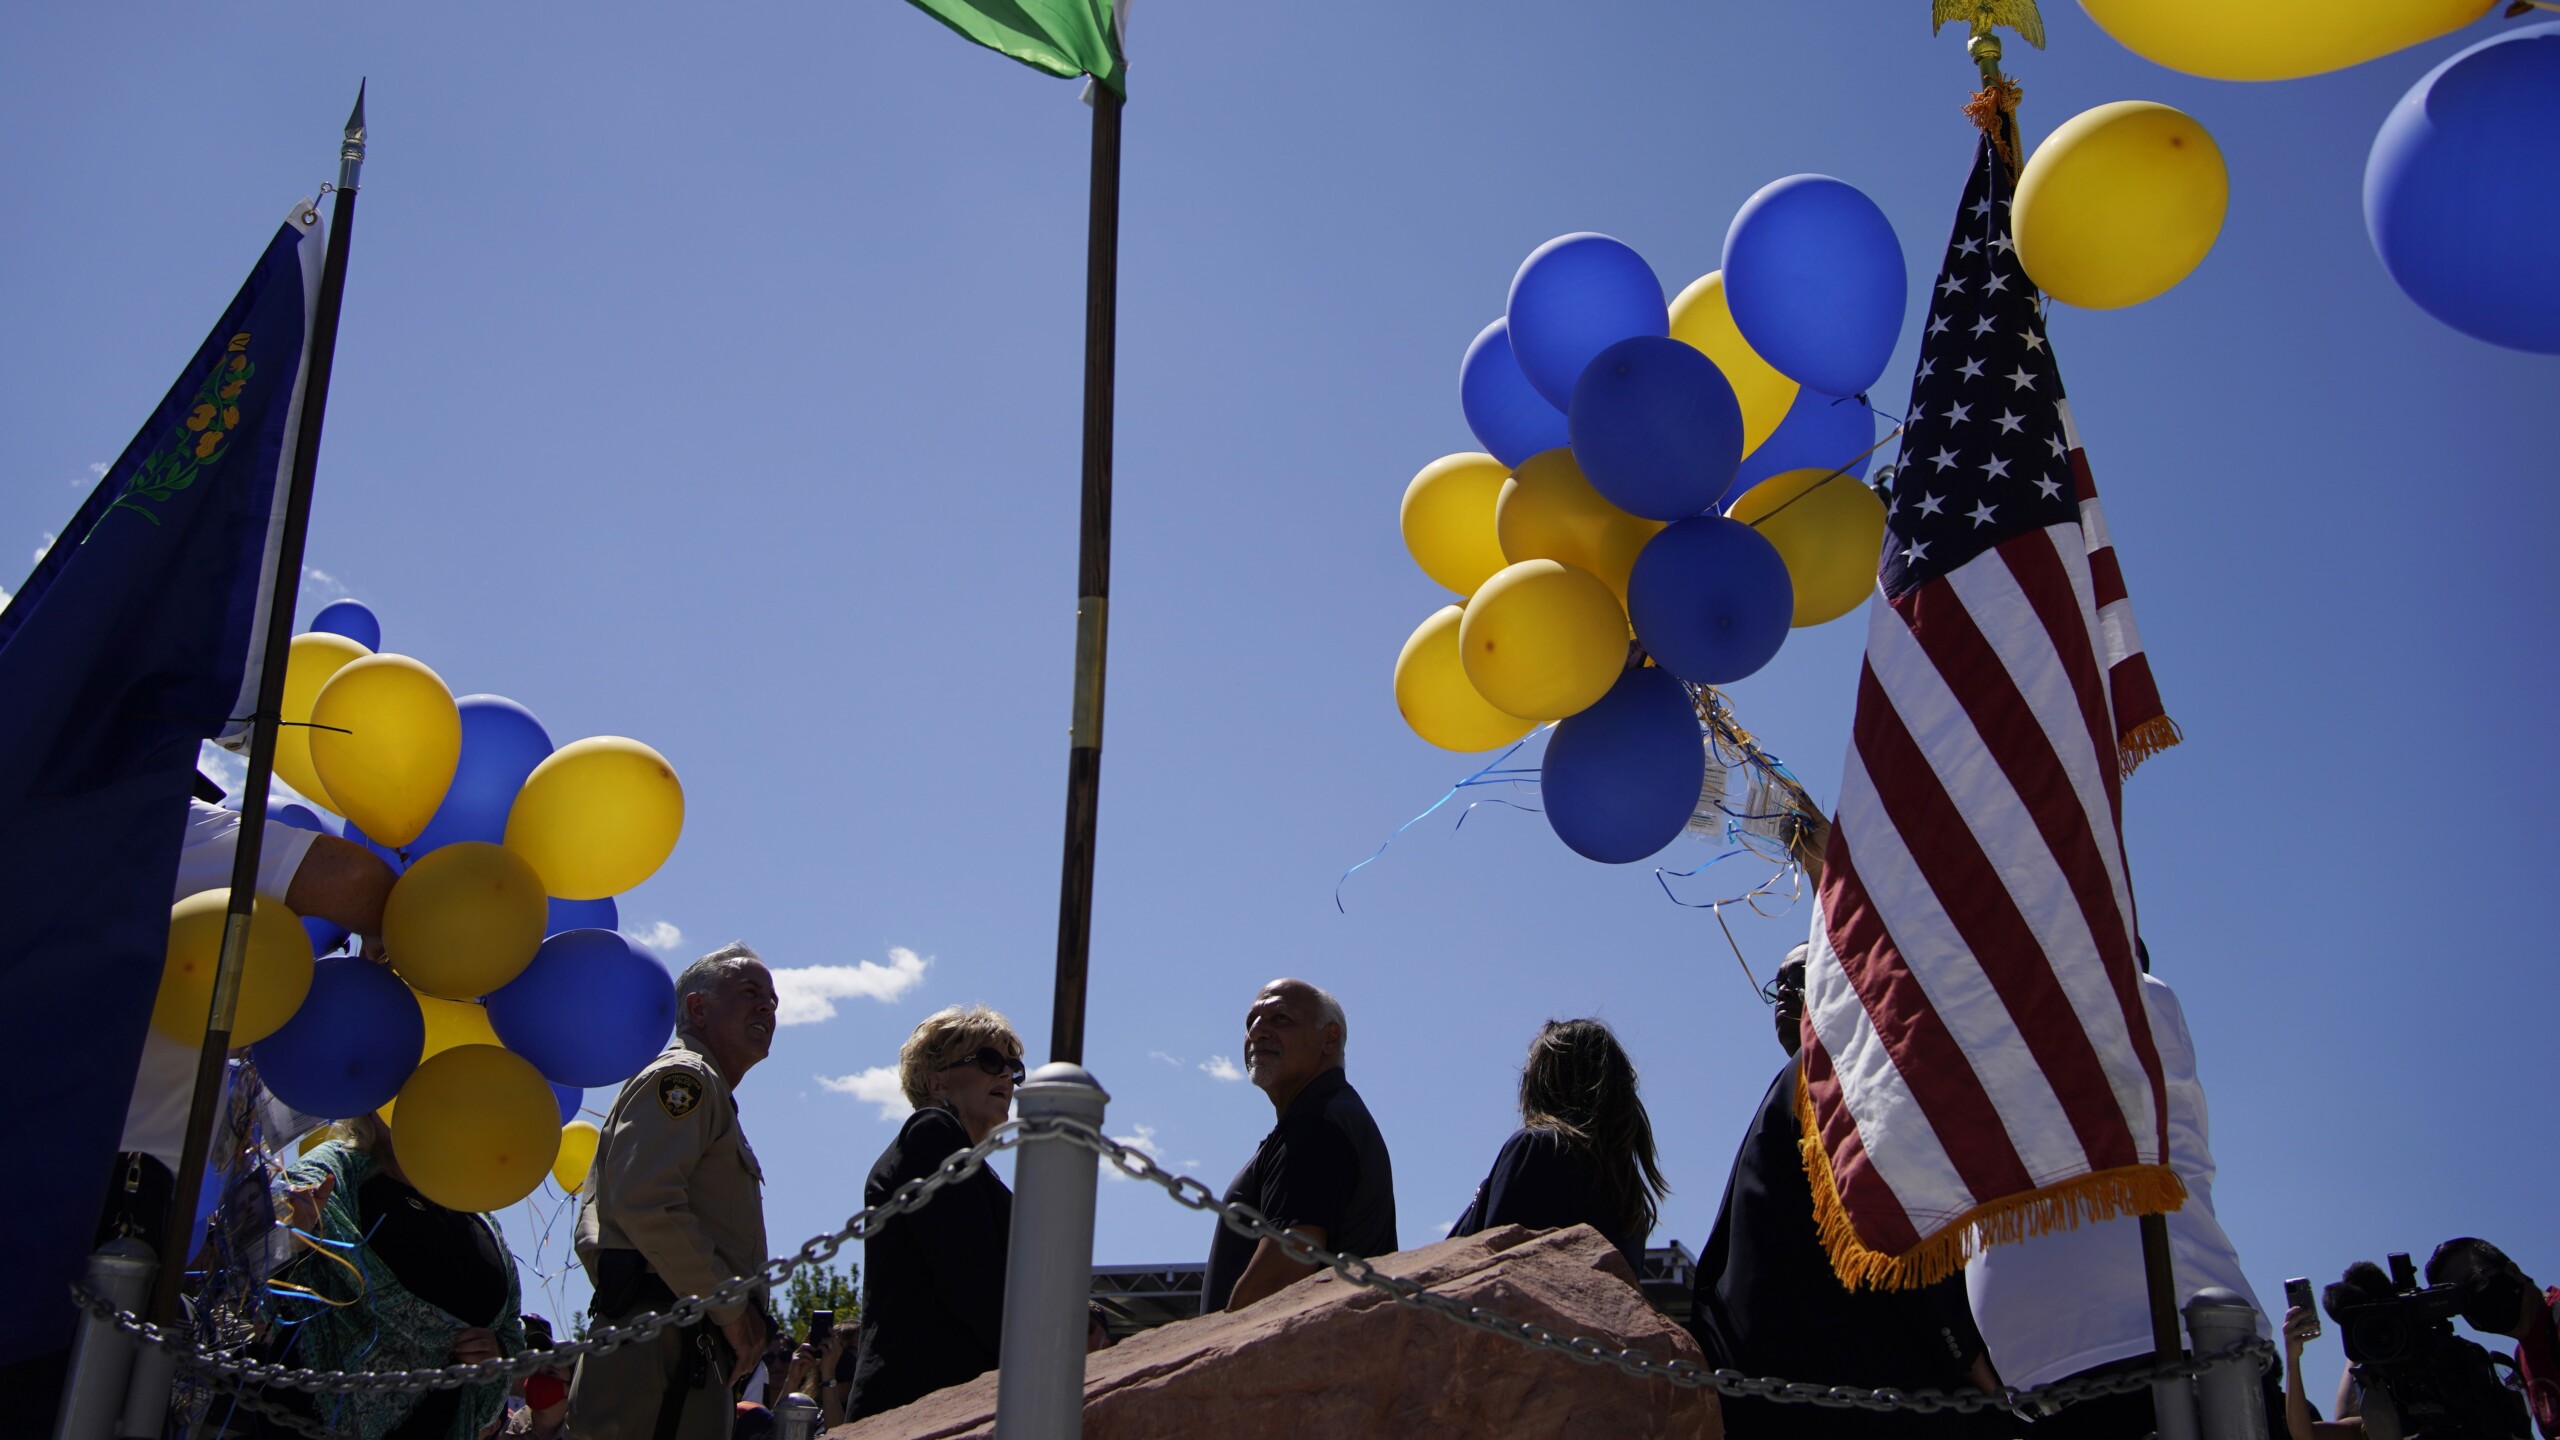 People watch as balloons are released during a ceremony to commemorate the 20th anniversary of the Sept. 11 terrorist attacks on Sept. 11, 2021, in Las Vegas. | John Locher, AP